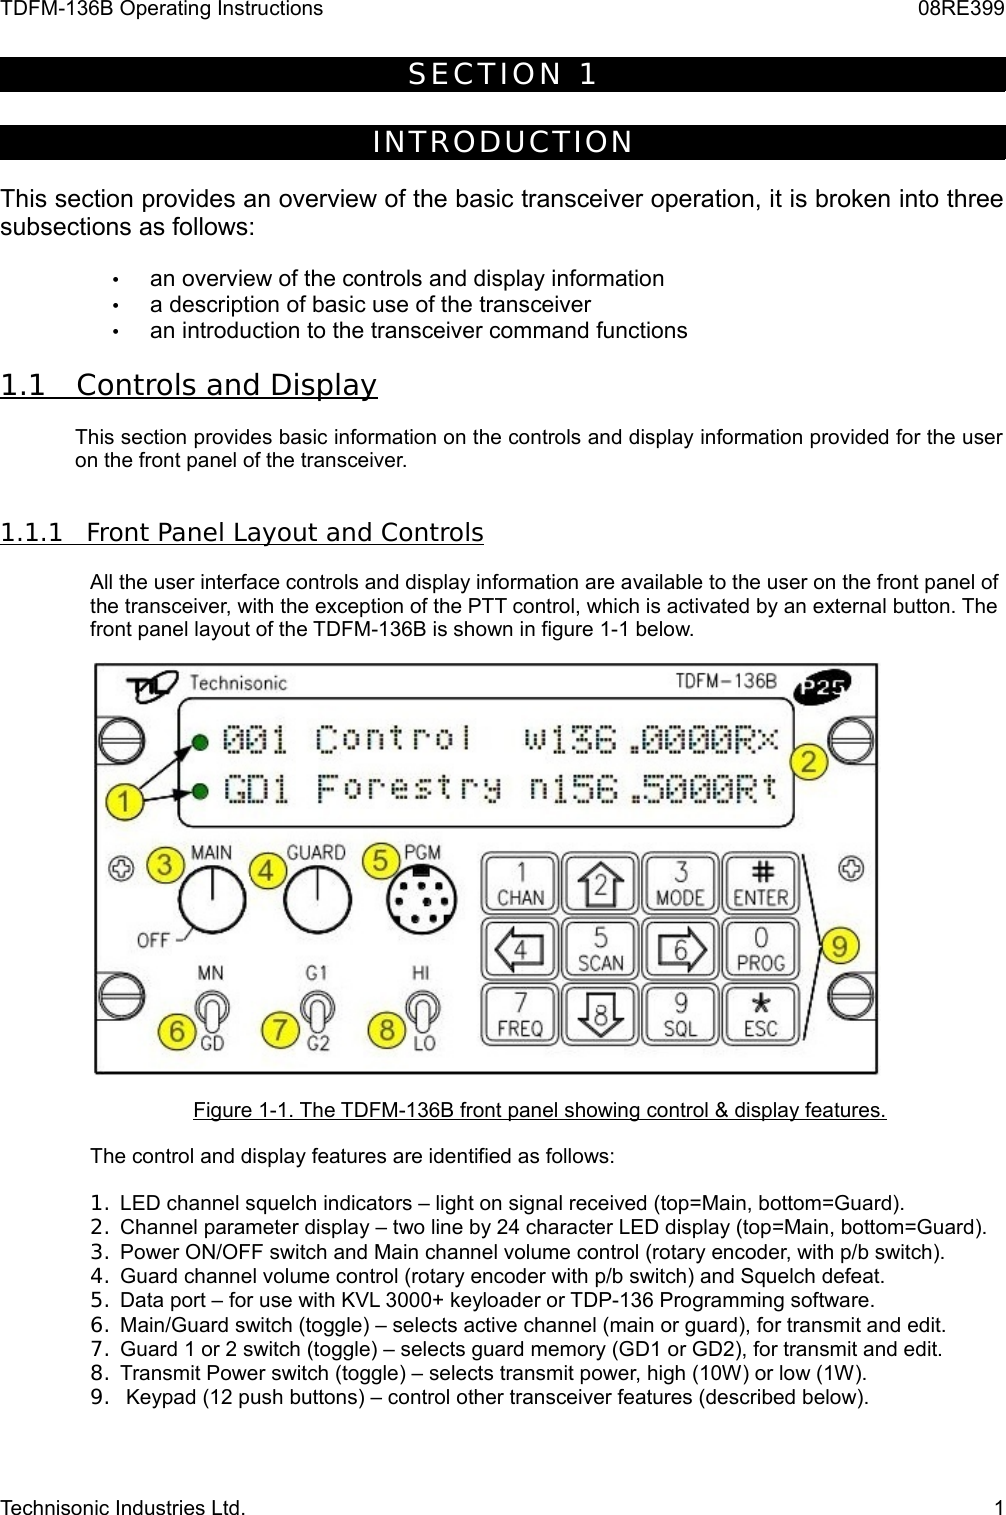 TDFM-136B Operating Instructions 08RE399S E C T I O N   1INTROD UCT IONThis section provides an overview of the basic transceiver operation, it is broken into three subsections as follows:•an overview of the controls and display information•a description of basic use of the transceiver•an introduction to the transceiver command functions1.1         Controls and Display   This section provides basic information on the controls and display information provided for the user  on the front panel of the transceiver.1.1.1         Front Panel Layout and Controls   All the user interface controls and display information are available to the user on the front panel of the transceiver, with the exception of the PTT control, which is activated by an external button. The front panel layout of the TDFM-136B is shown in figure 1-1 below.Figure 1-1. The TDFM-136B front panel showing control &amp; display features.The control and display features are identified as follows:1. LED channel squelch indicators – light on signal received (top=Main, bottom=Guard).2. Channel parameter display – two line by 24 character LED display (top=Main, bottom=Guard).3. Power ON/OFF switch and Main channel volume control (rotary encoder, with p/b switch).4. Guard channel volume control (rotary encoder with p/b switch) and Squelch defeat.5. Data port – for use with KVL 3000+ keyloader or TDP-136 Programming software.6. Main/Guard switch (toggle) – selects active channel (main or guard), for transmit and edit.7. Guard 1 or 2 switch (toggle) – selects guard memory (GD1 or GD2), for transmit and edit.8. Transmit Power switch (toggle) – selects transmit power, high (10W) or low (1W).9.  Keypad (12 push buttons) – control other transceiver features (described below).Technisonic Industries Ltd. 1